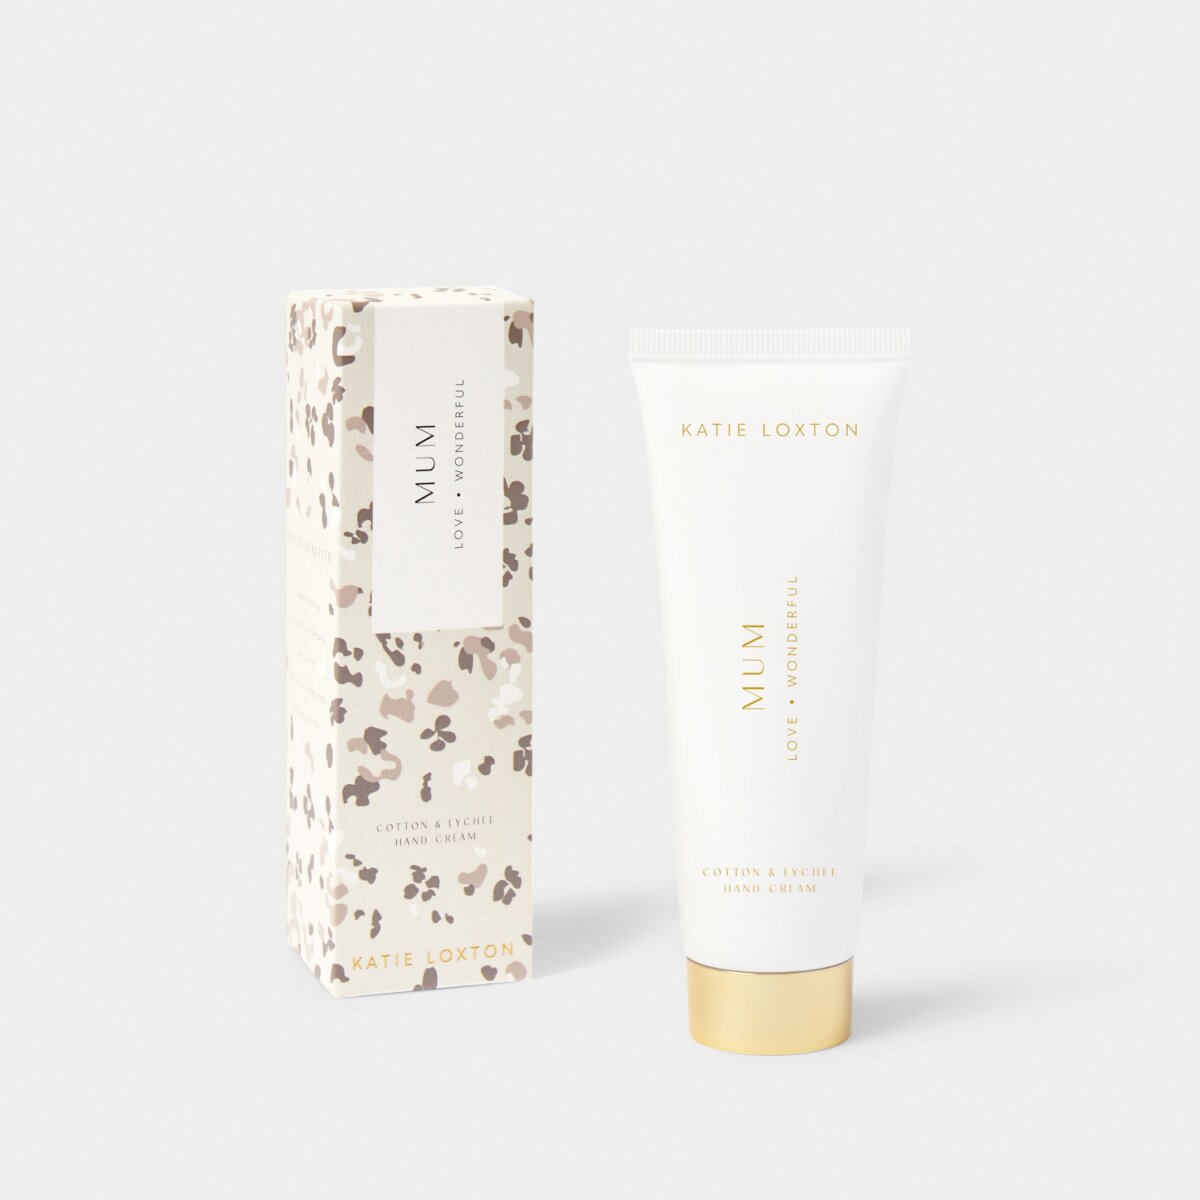 A Tube of 'Mum' handcream sitting next to its blossom floral decorated box.